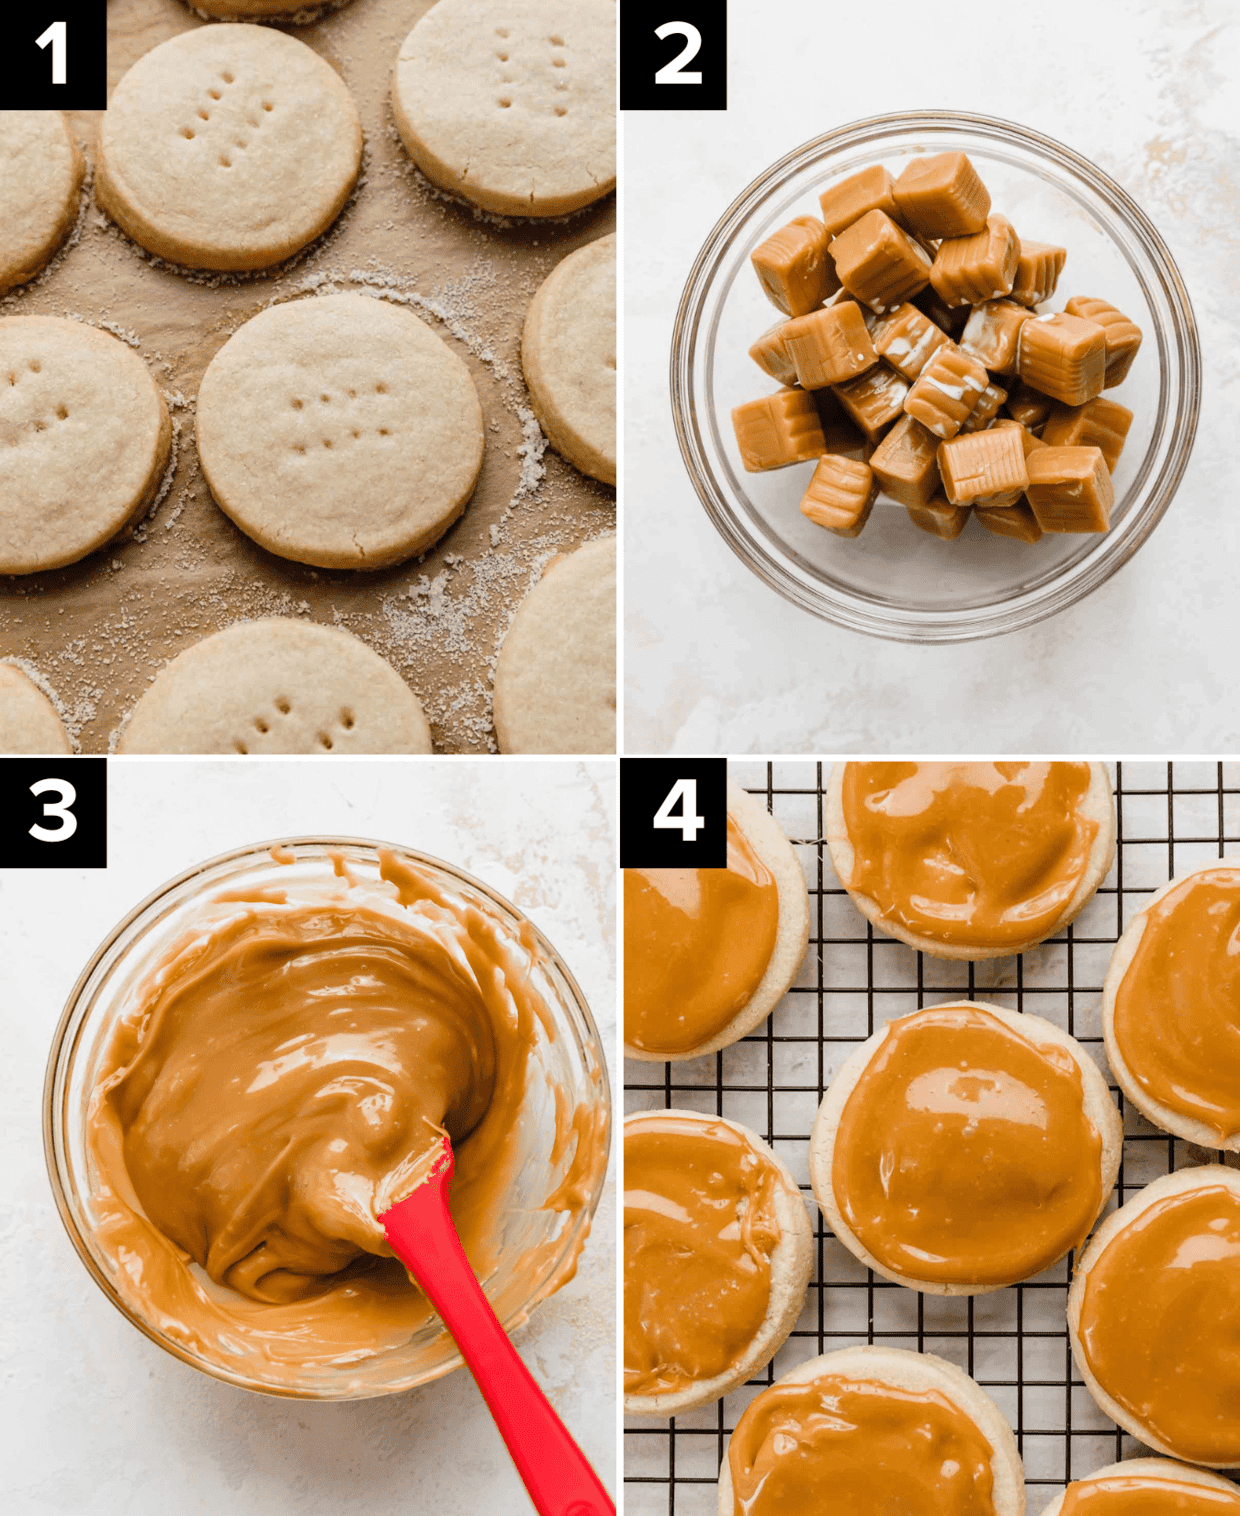 Four images showing how to make Twix Cookies, top left is shortbread cookies on parchment paper, top right is glass bowl filled with unwrapped caramels, bottom left is smooth caramel in glass bowl, bottom right is caramel topped shortbread cookies.